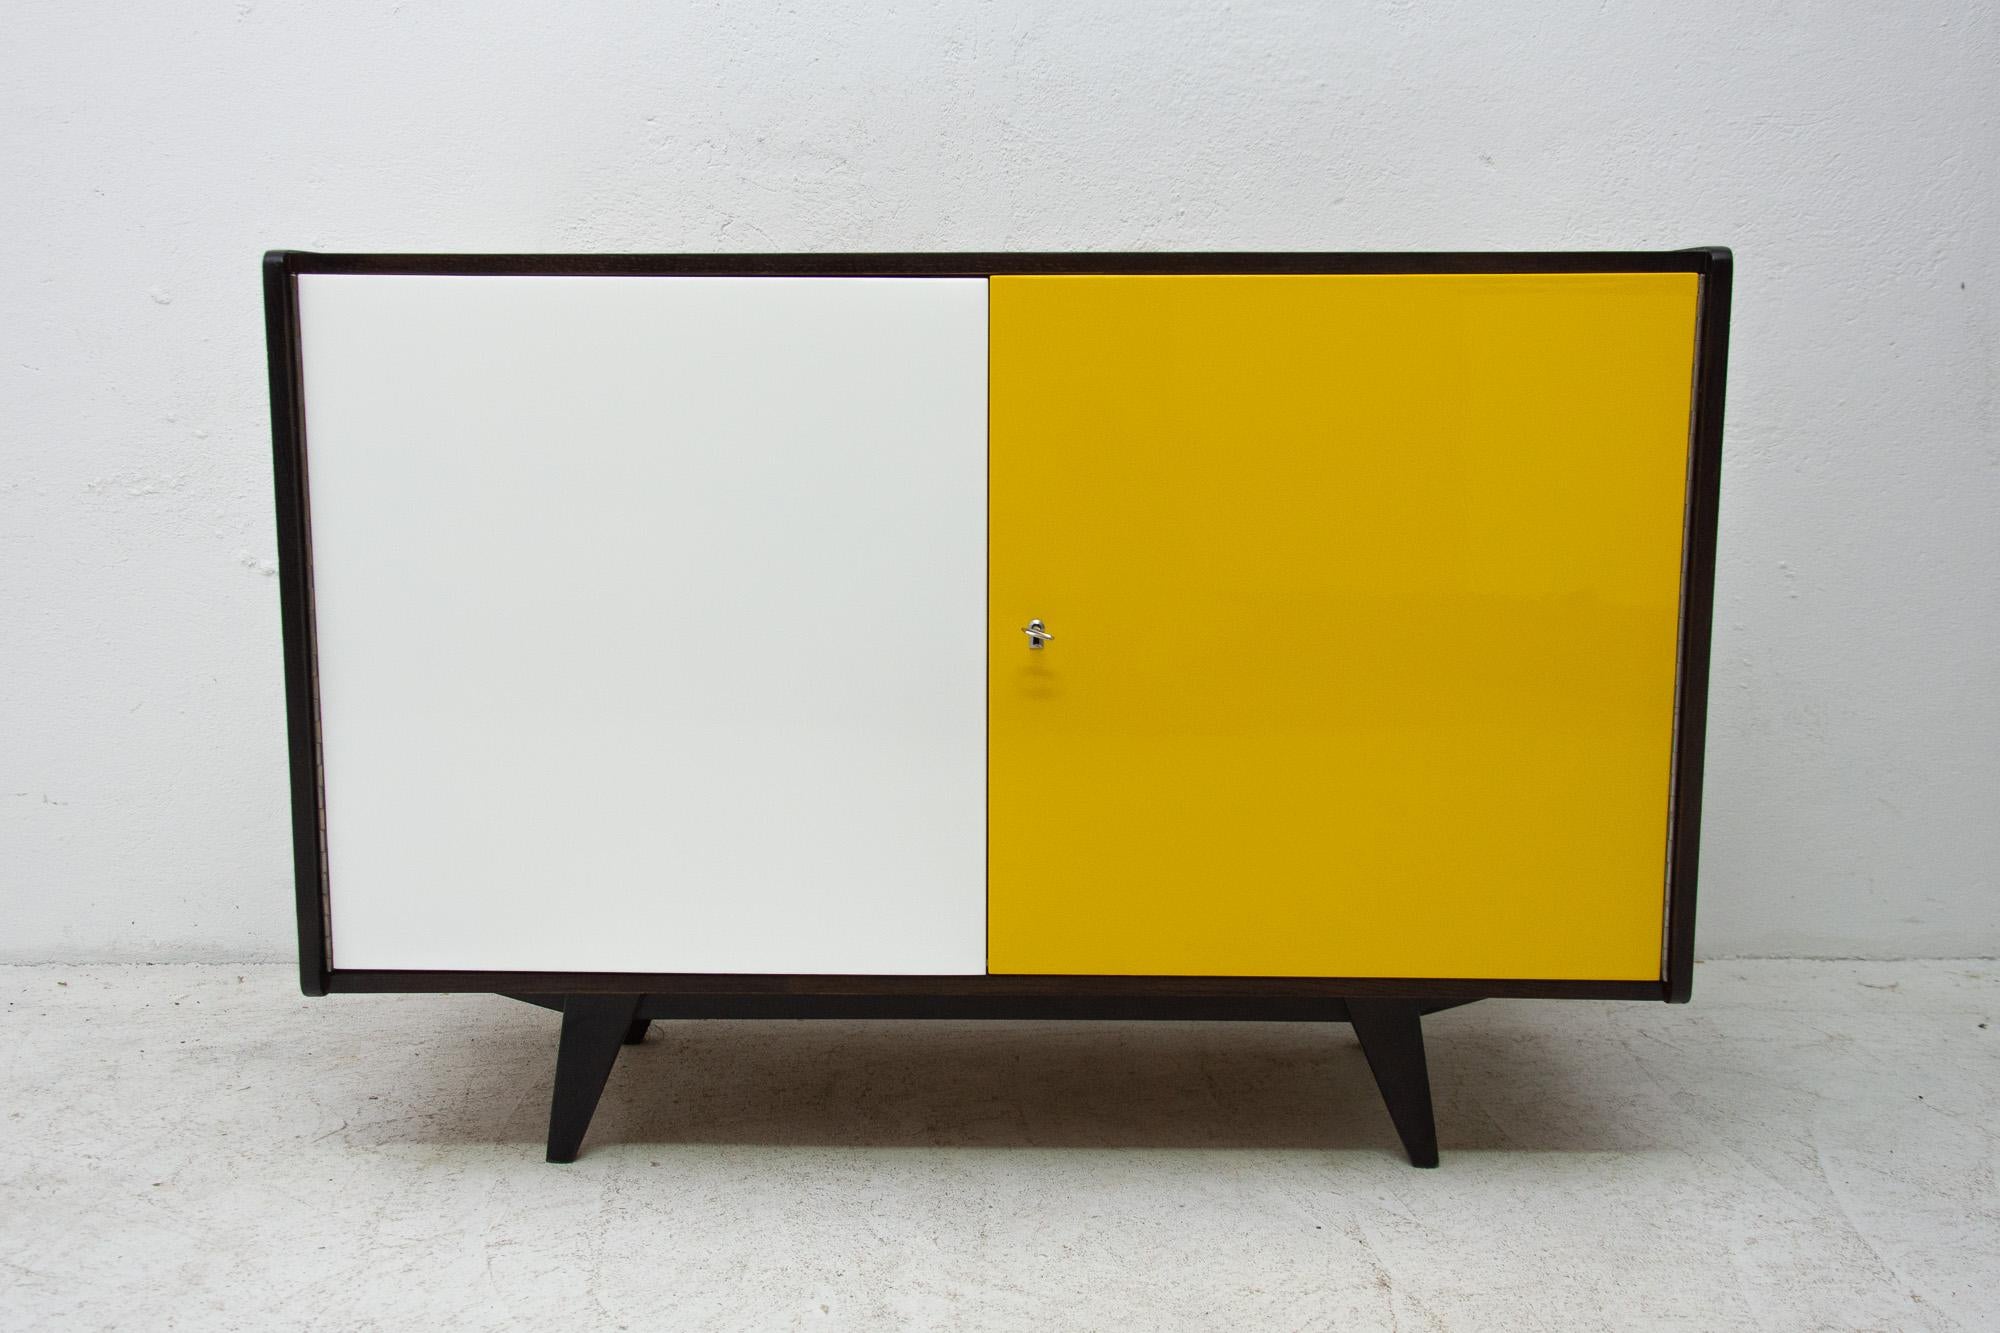 Midcentury sideboard-cabinet, catalogue No. U-450, designed by Jiri Jiroutek. It´s made of beechwood, veneer, plywood and laminate. In excellent condition, fully refurbished. Dark stained surface, mahogany inside.

The cabinet comes from the